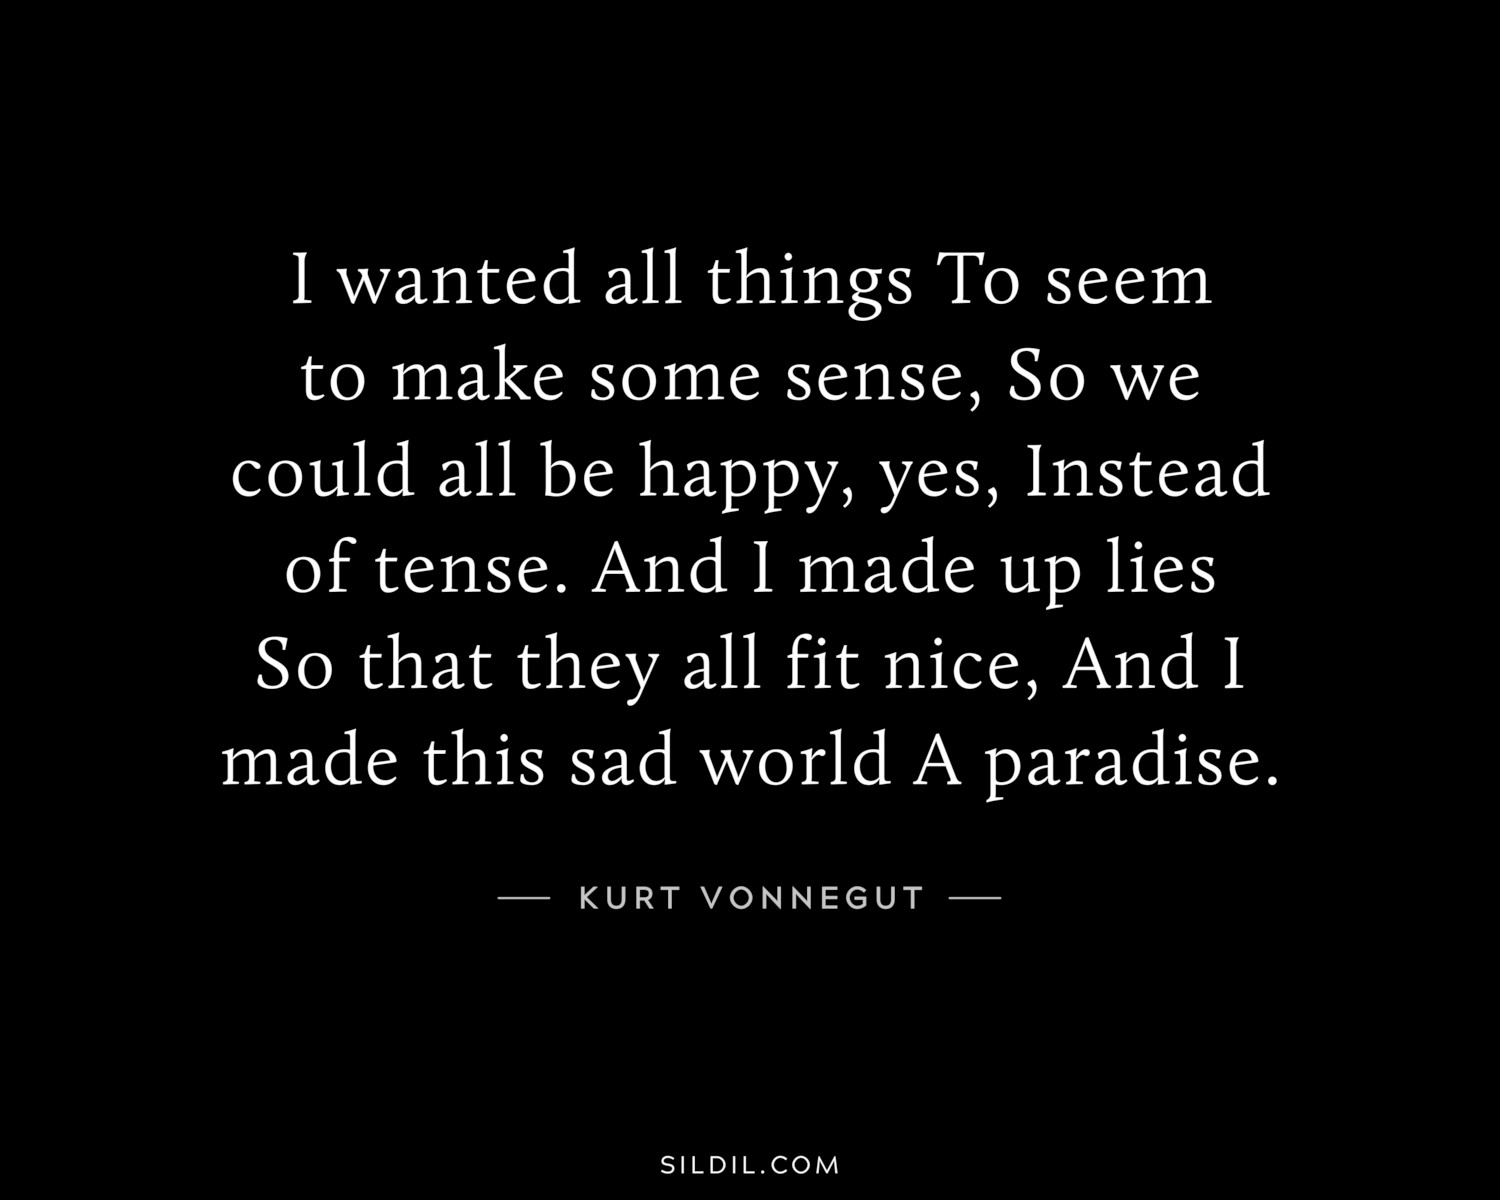 I wanted all things To seem to make some sense, So we could all be happy, yes, Instead of tense. And I made up lies So that they all fit nice, And I made this sad world A paradise.